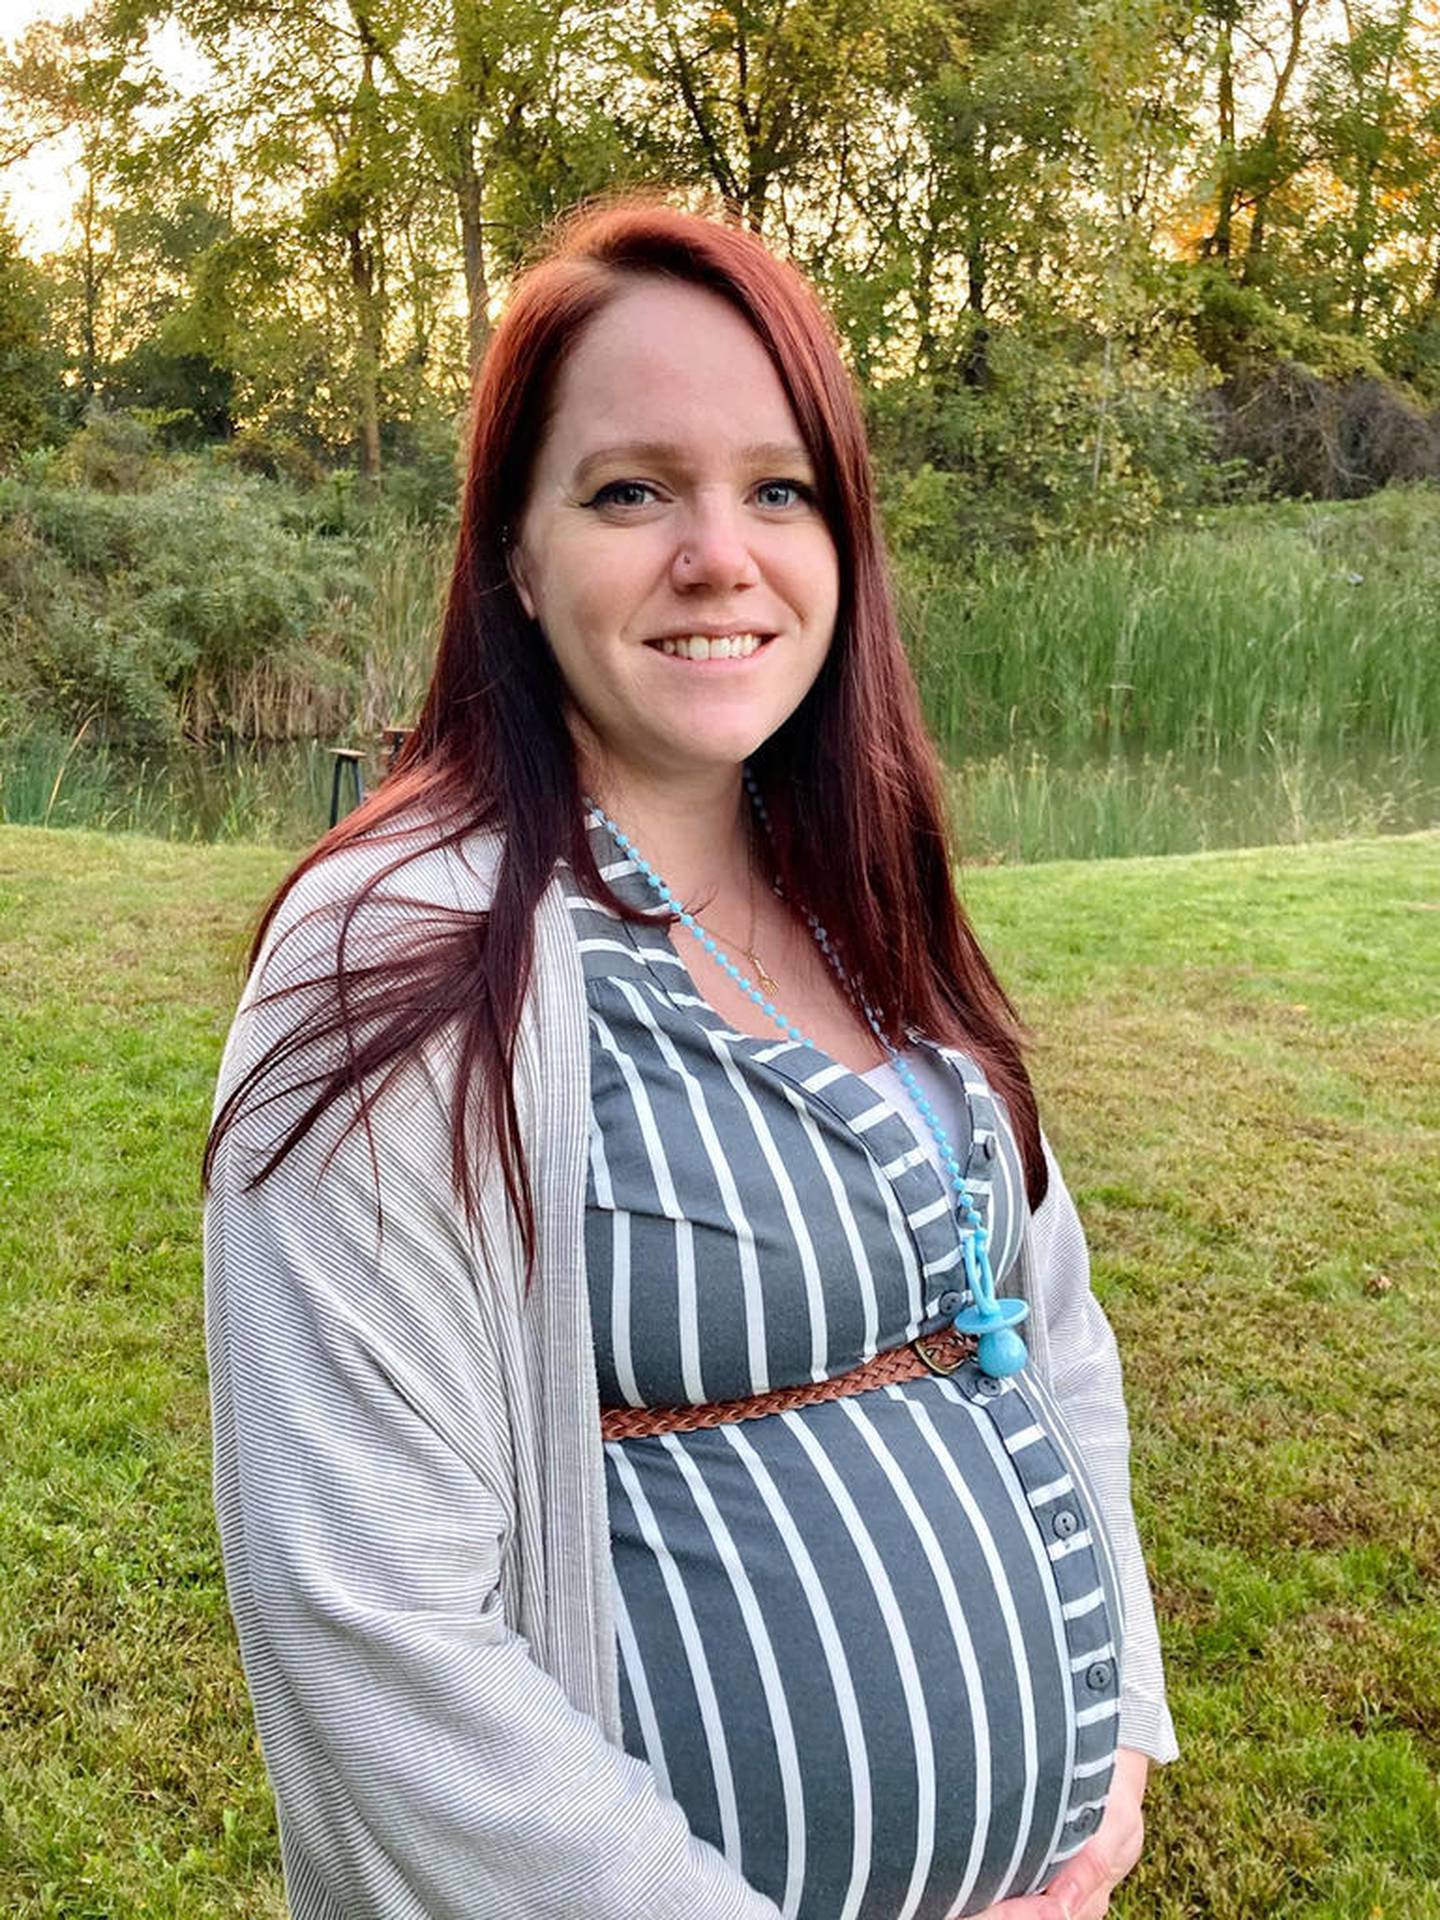 Melissa Lamesch and her unborn son died Nov. 25, 2020, at her home in Mt. Morris. A Malta man has been charged with their murders.